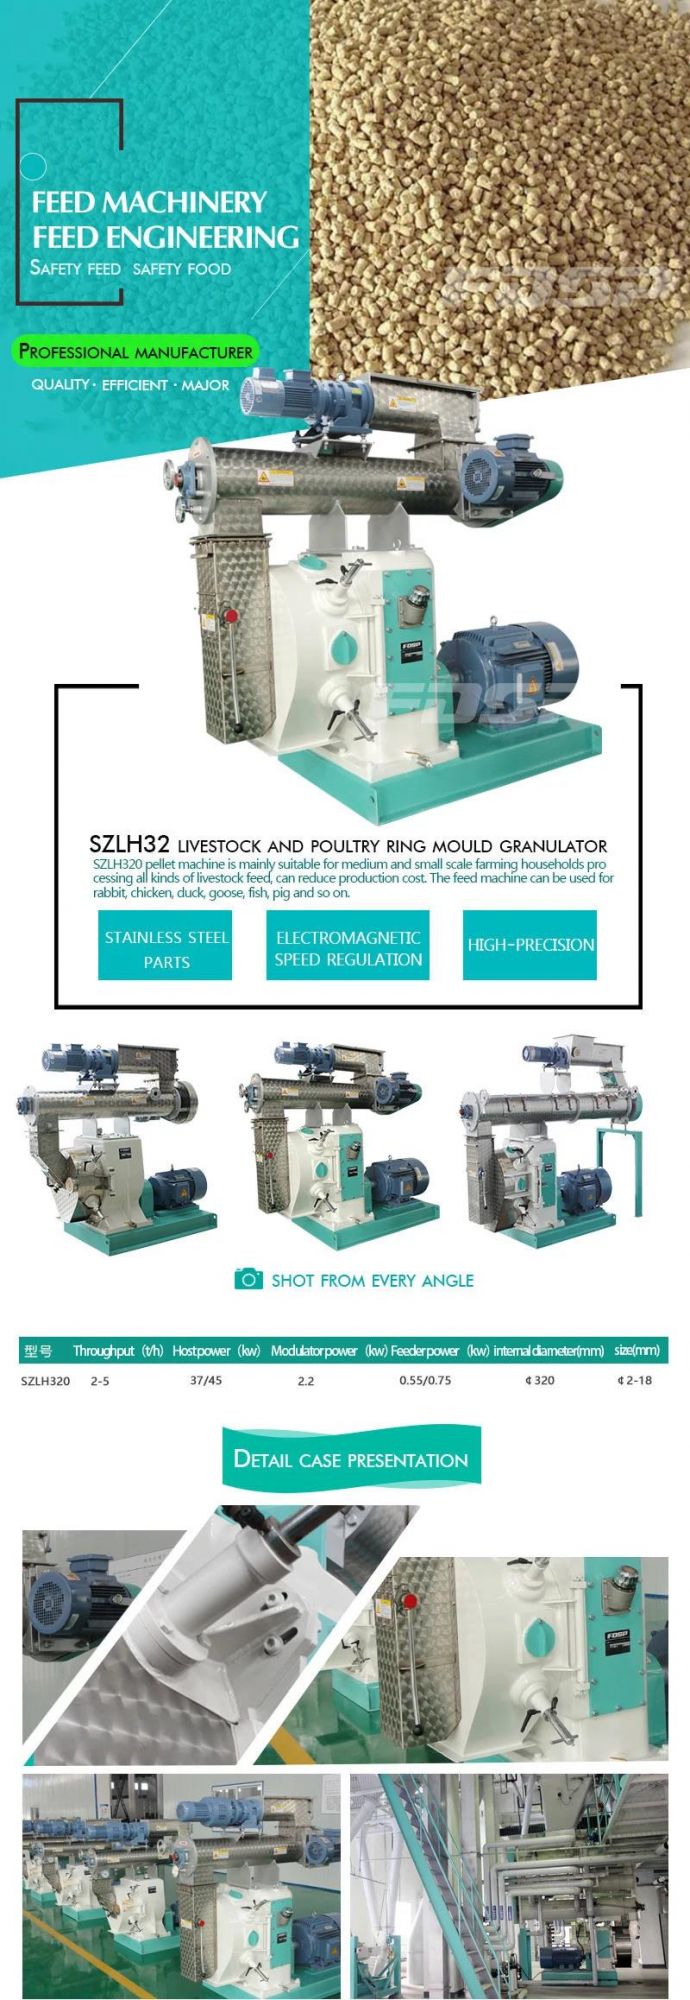 Automatic Pellet Machine for Livestock and Poultry-Szlh320